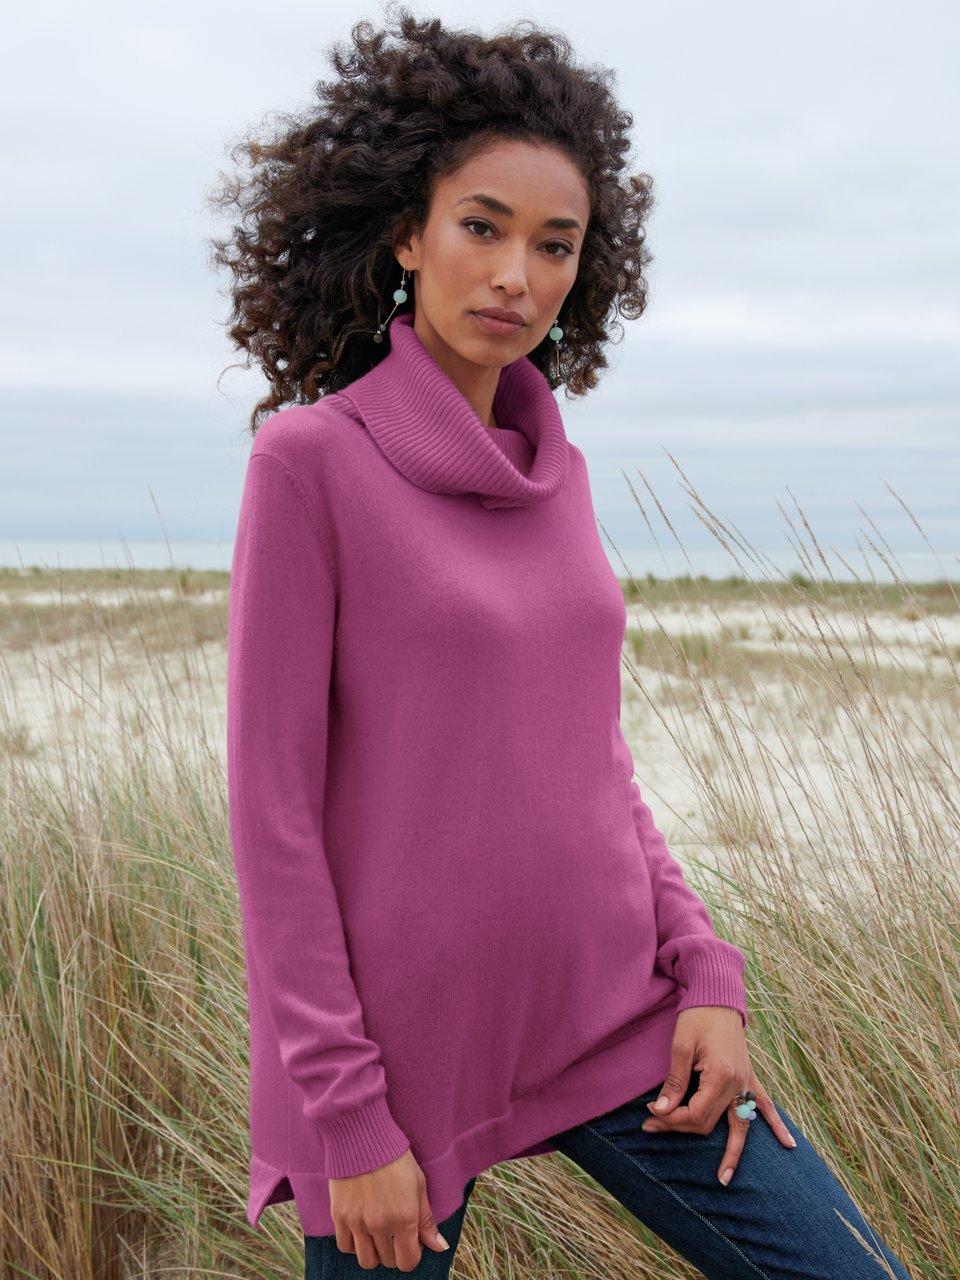 Ladies' Cashmere, Soft Knit Jumpers, Cardigans and Dresses